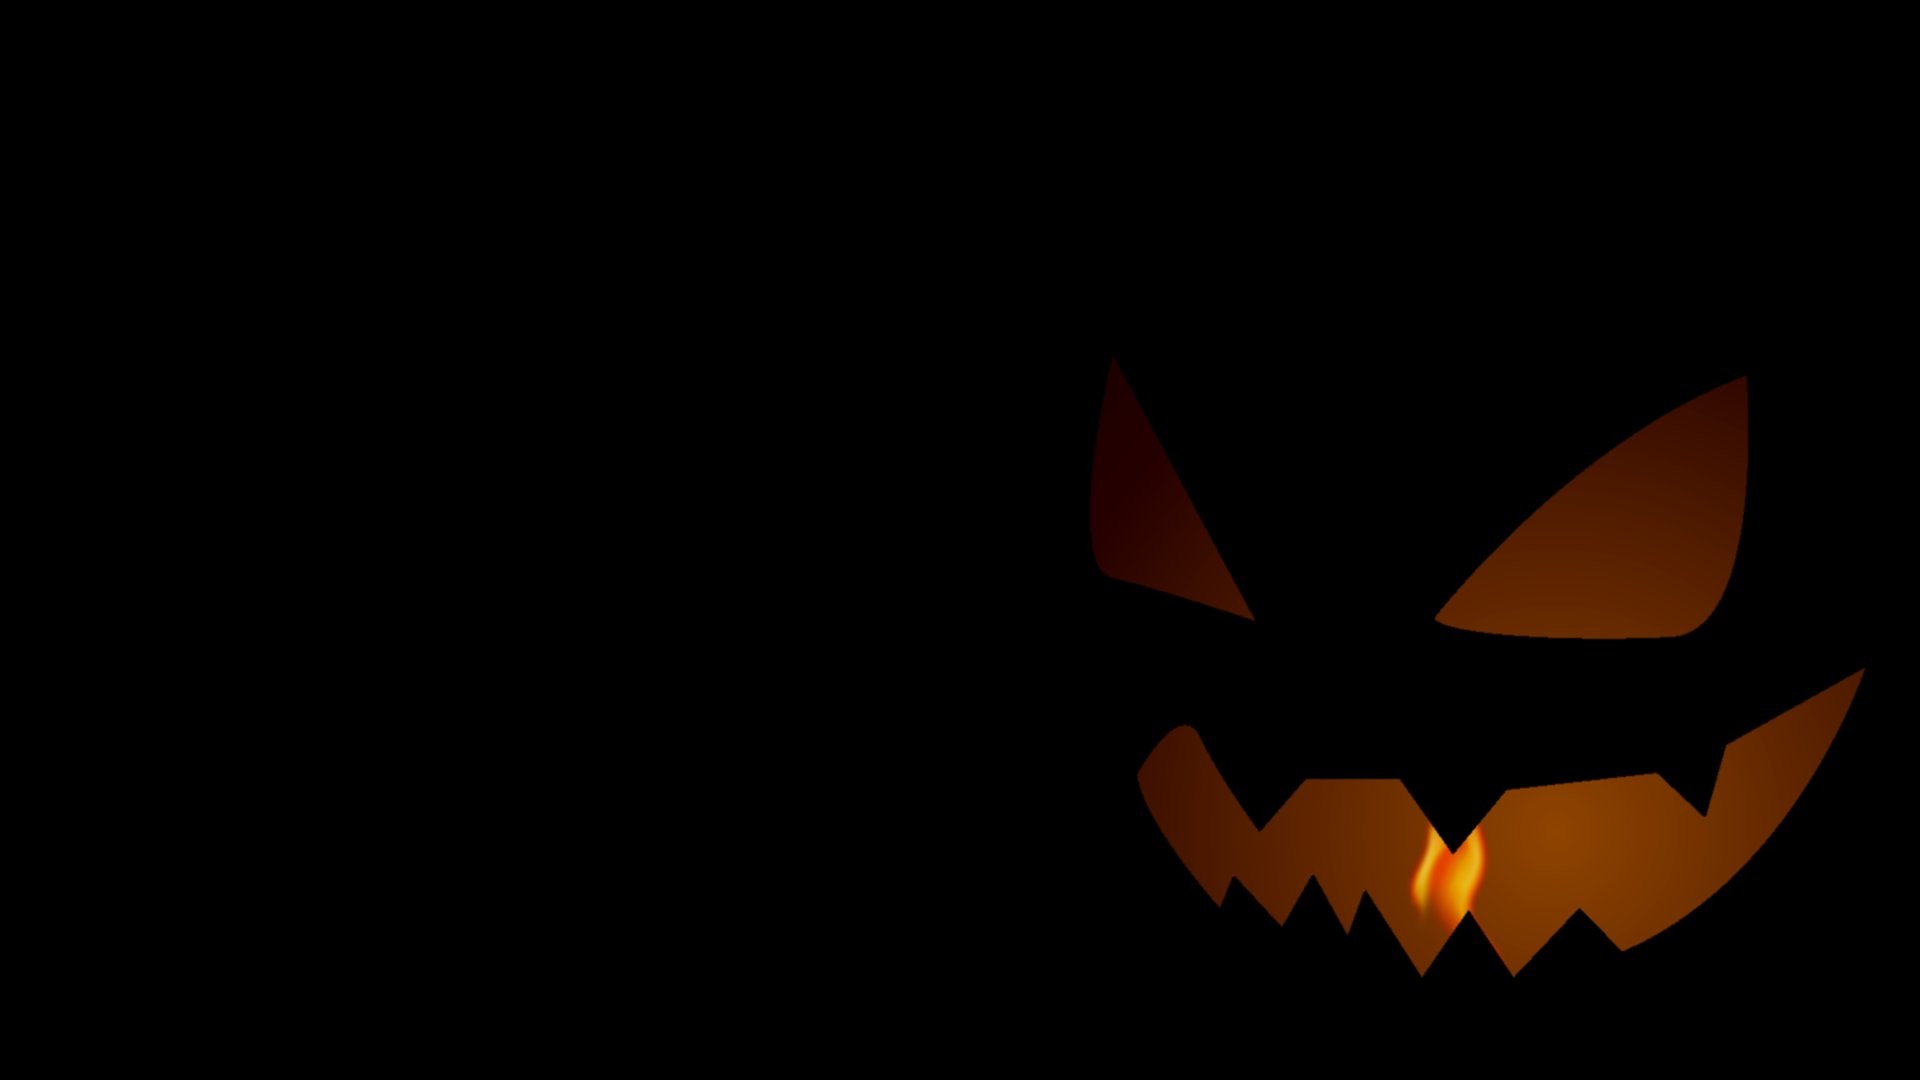 1920x1080 ... Backgrounds - Wallpaper Abyss 31 of the Scariest Halloween Desktop  Wallpapers for 2014 - Brand .